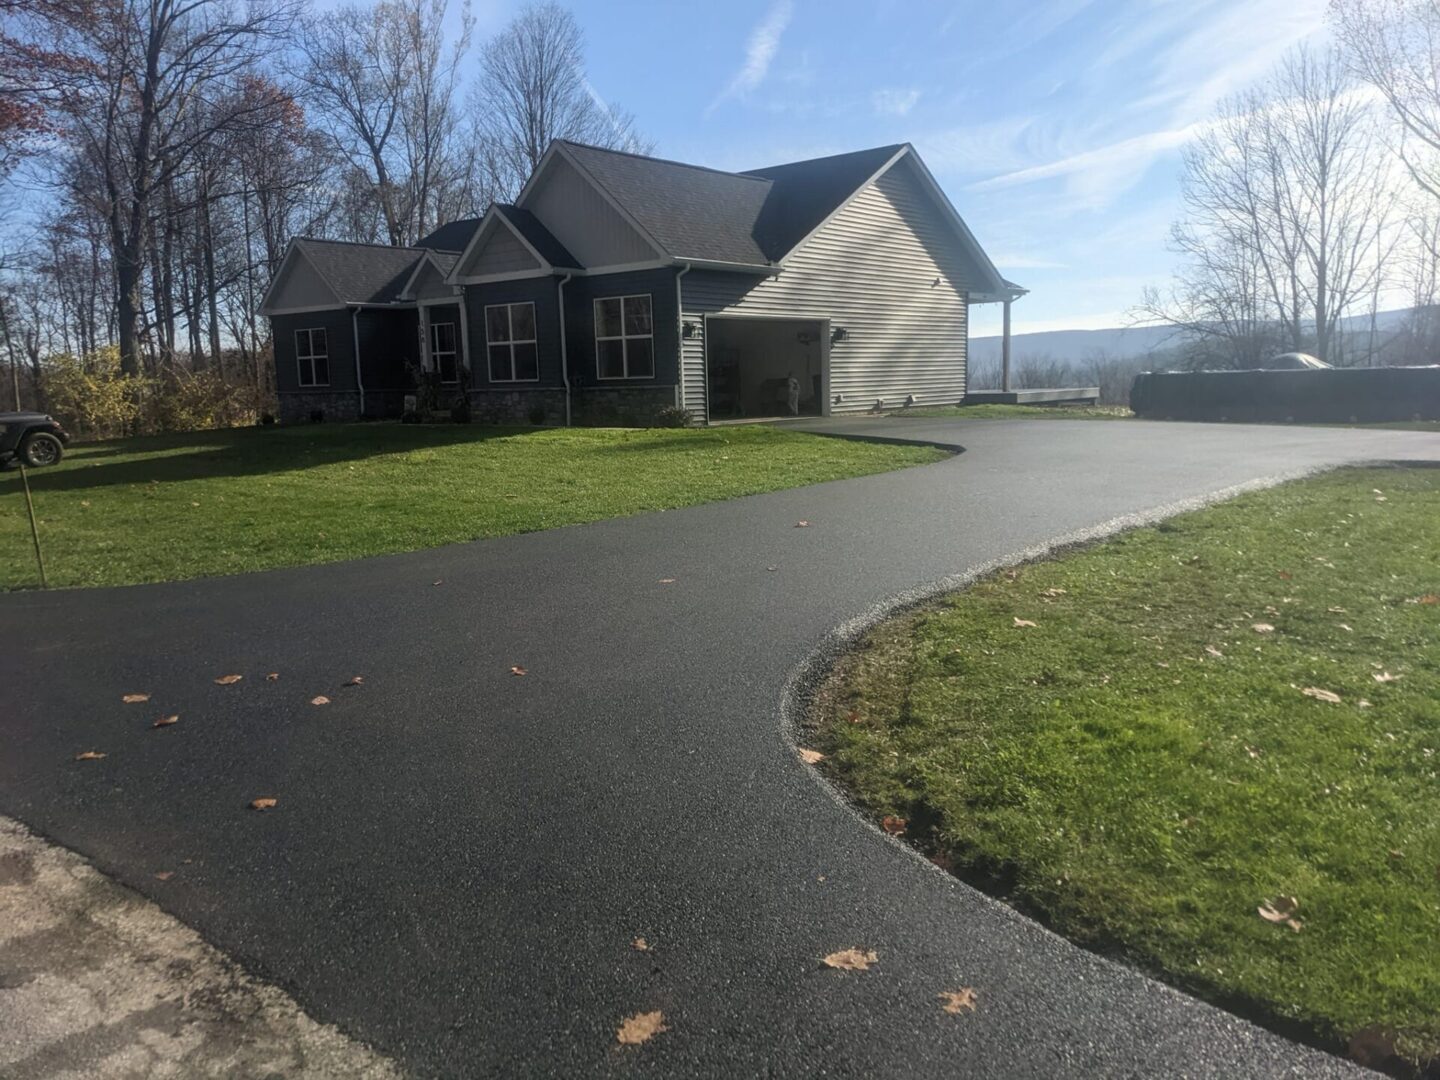 A house with a driveway and grass in front of it.